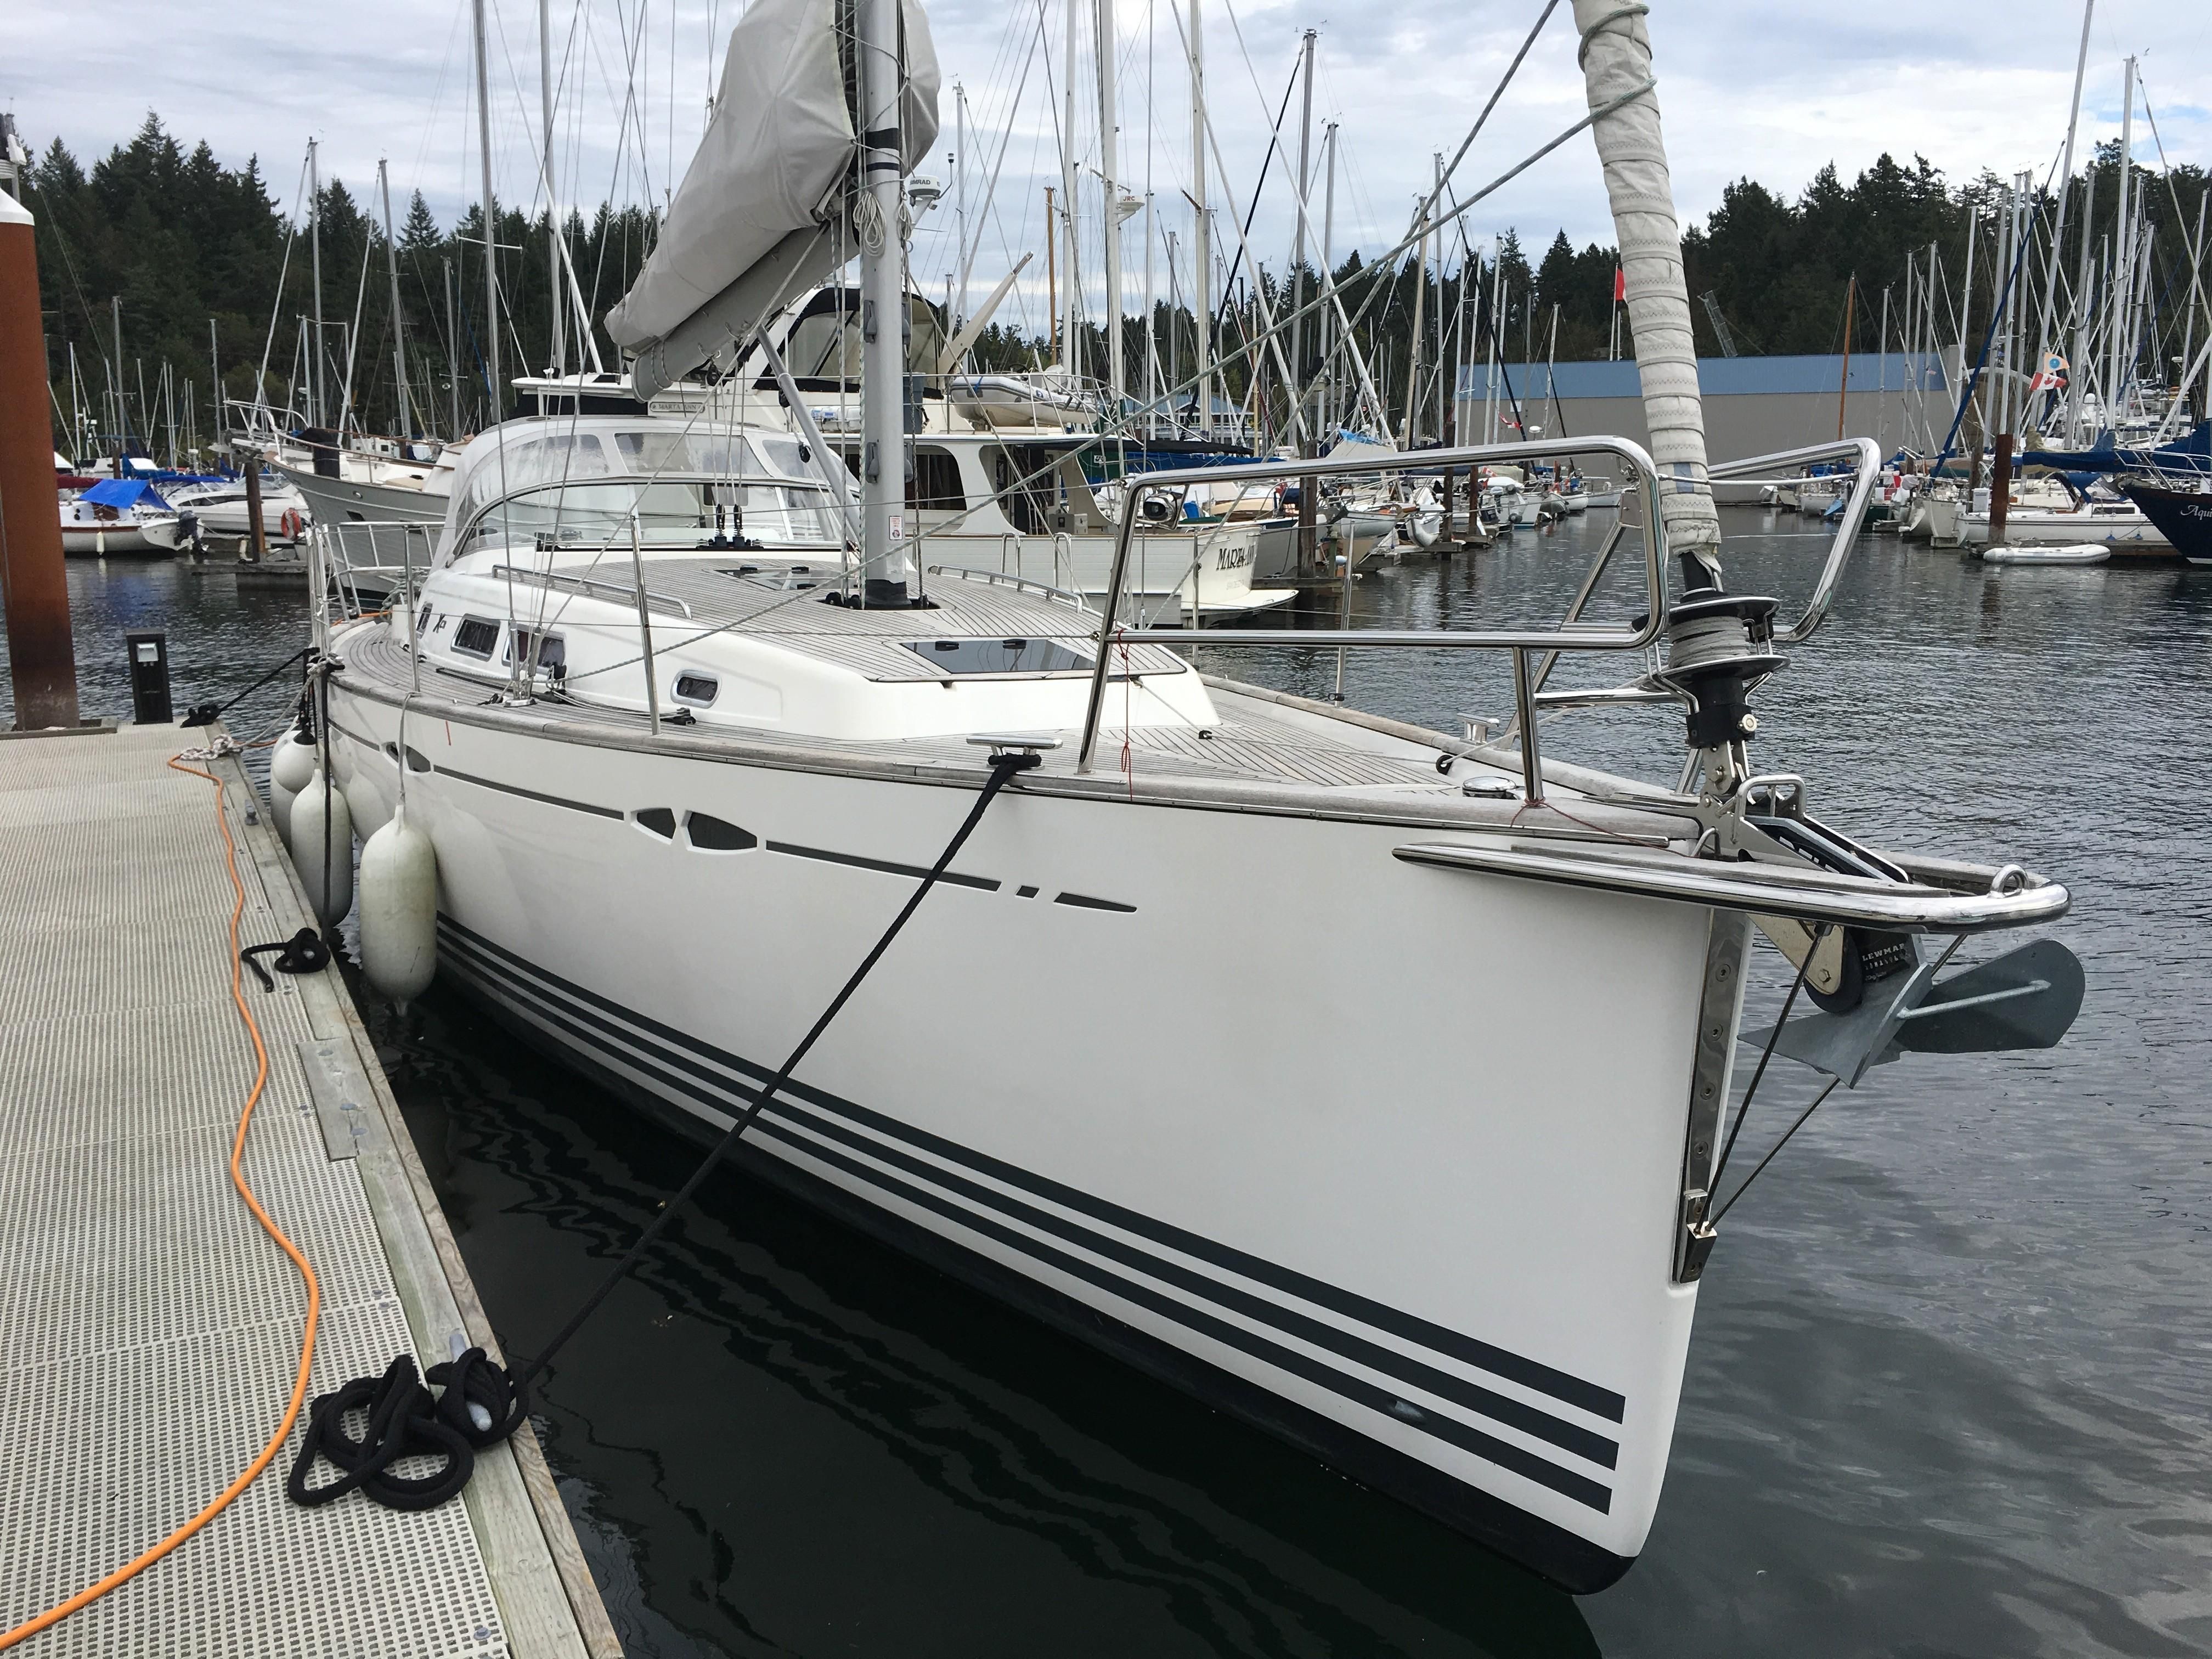 xc yachts for sale